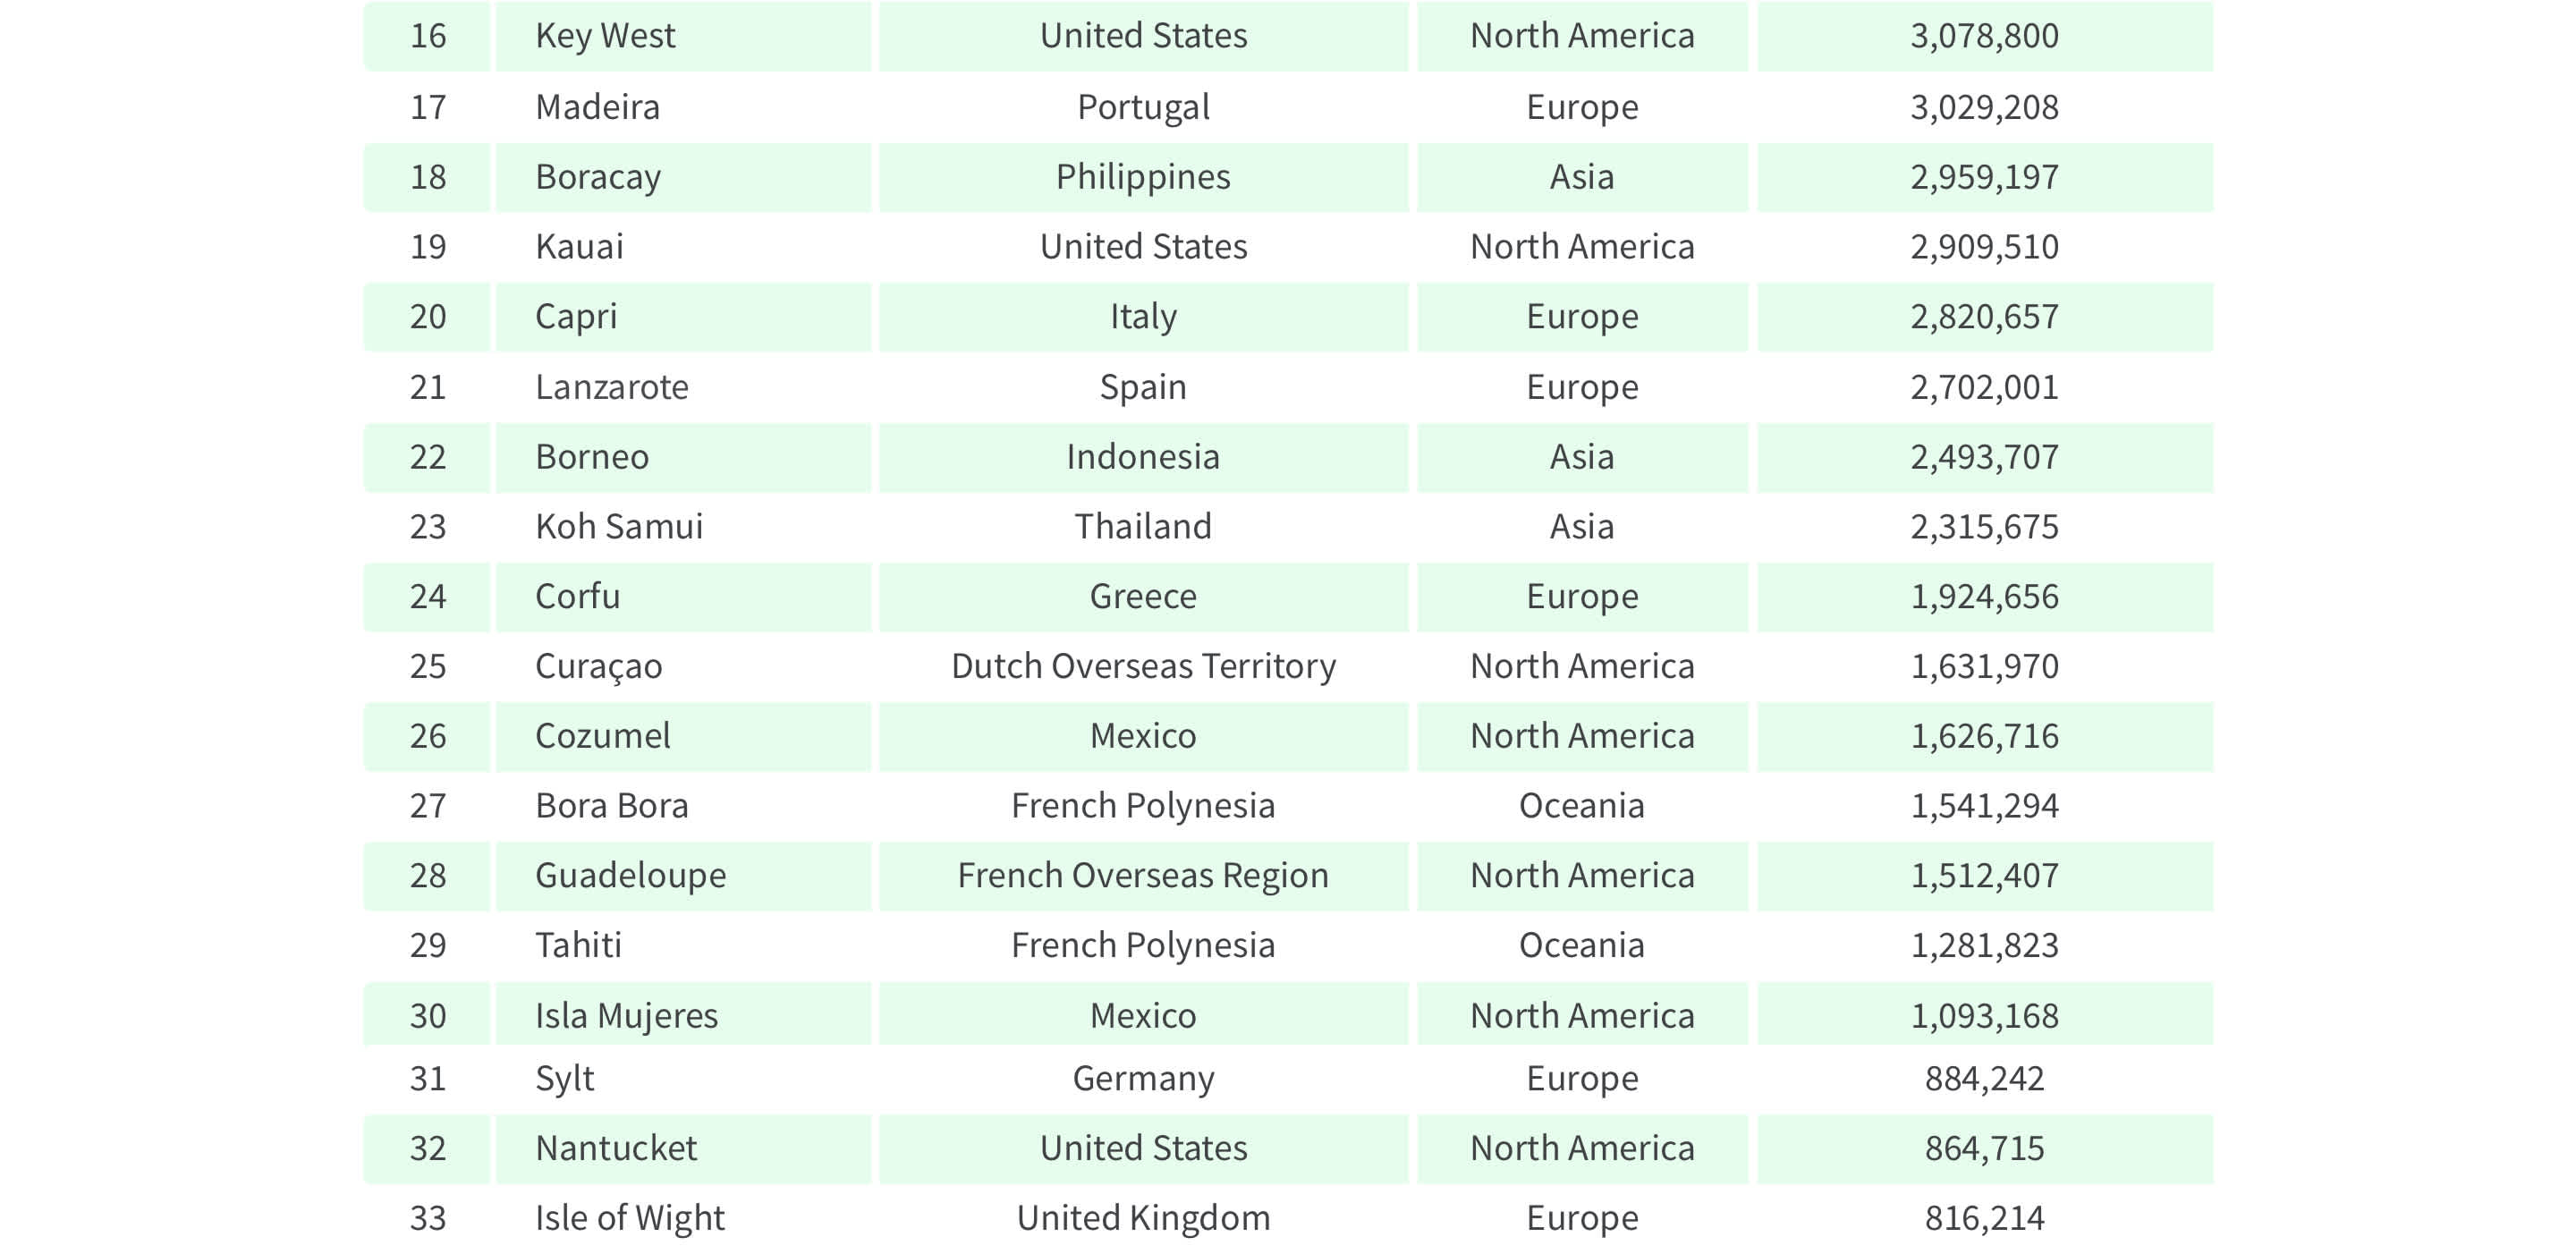 Table of the world's most instagrammed islands, rank 16-33